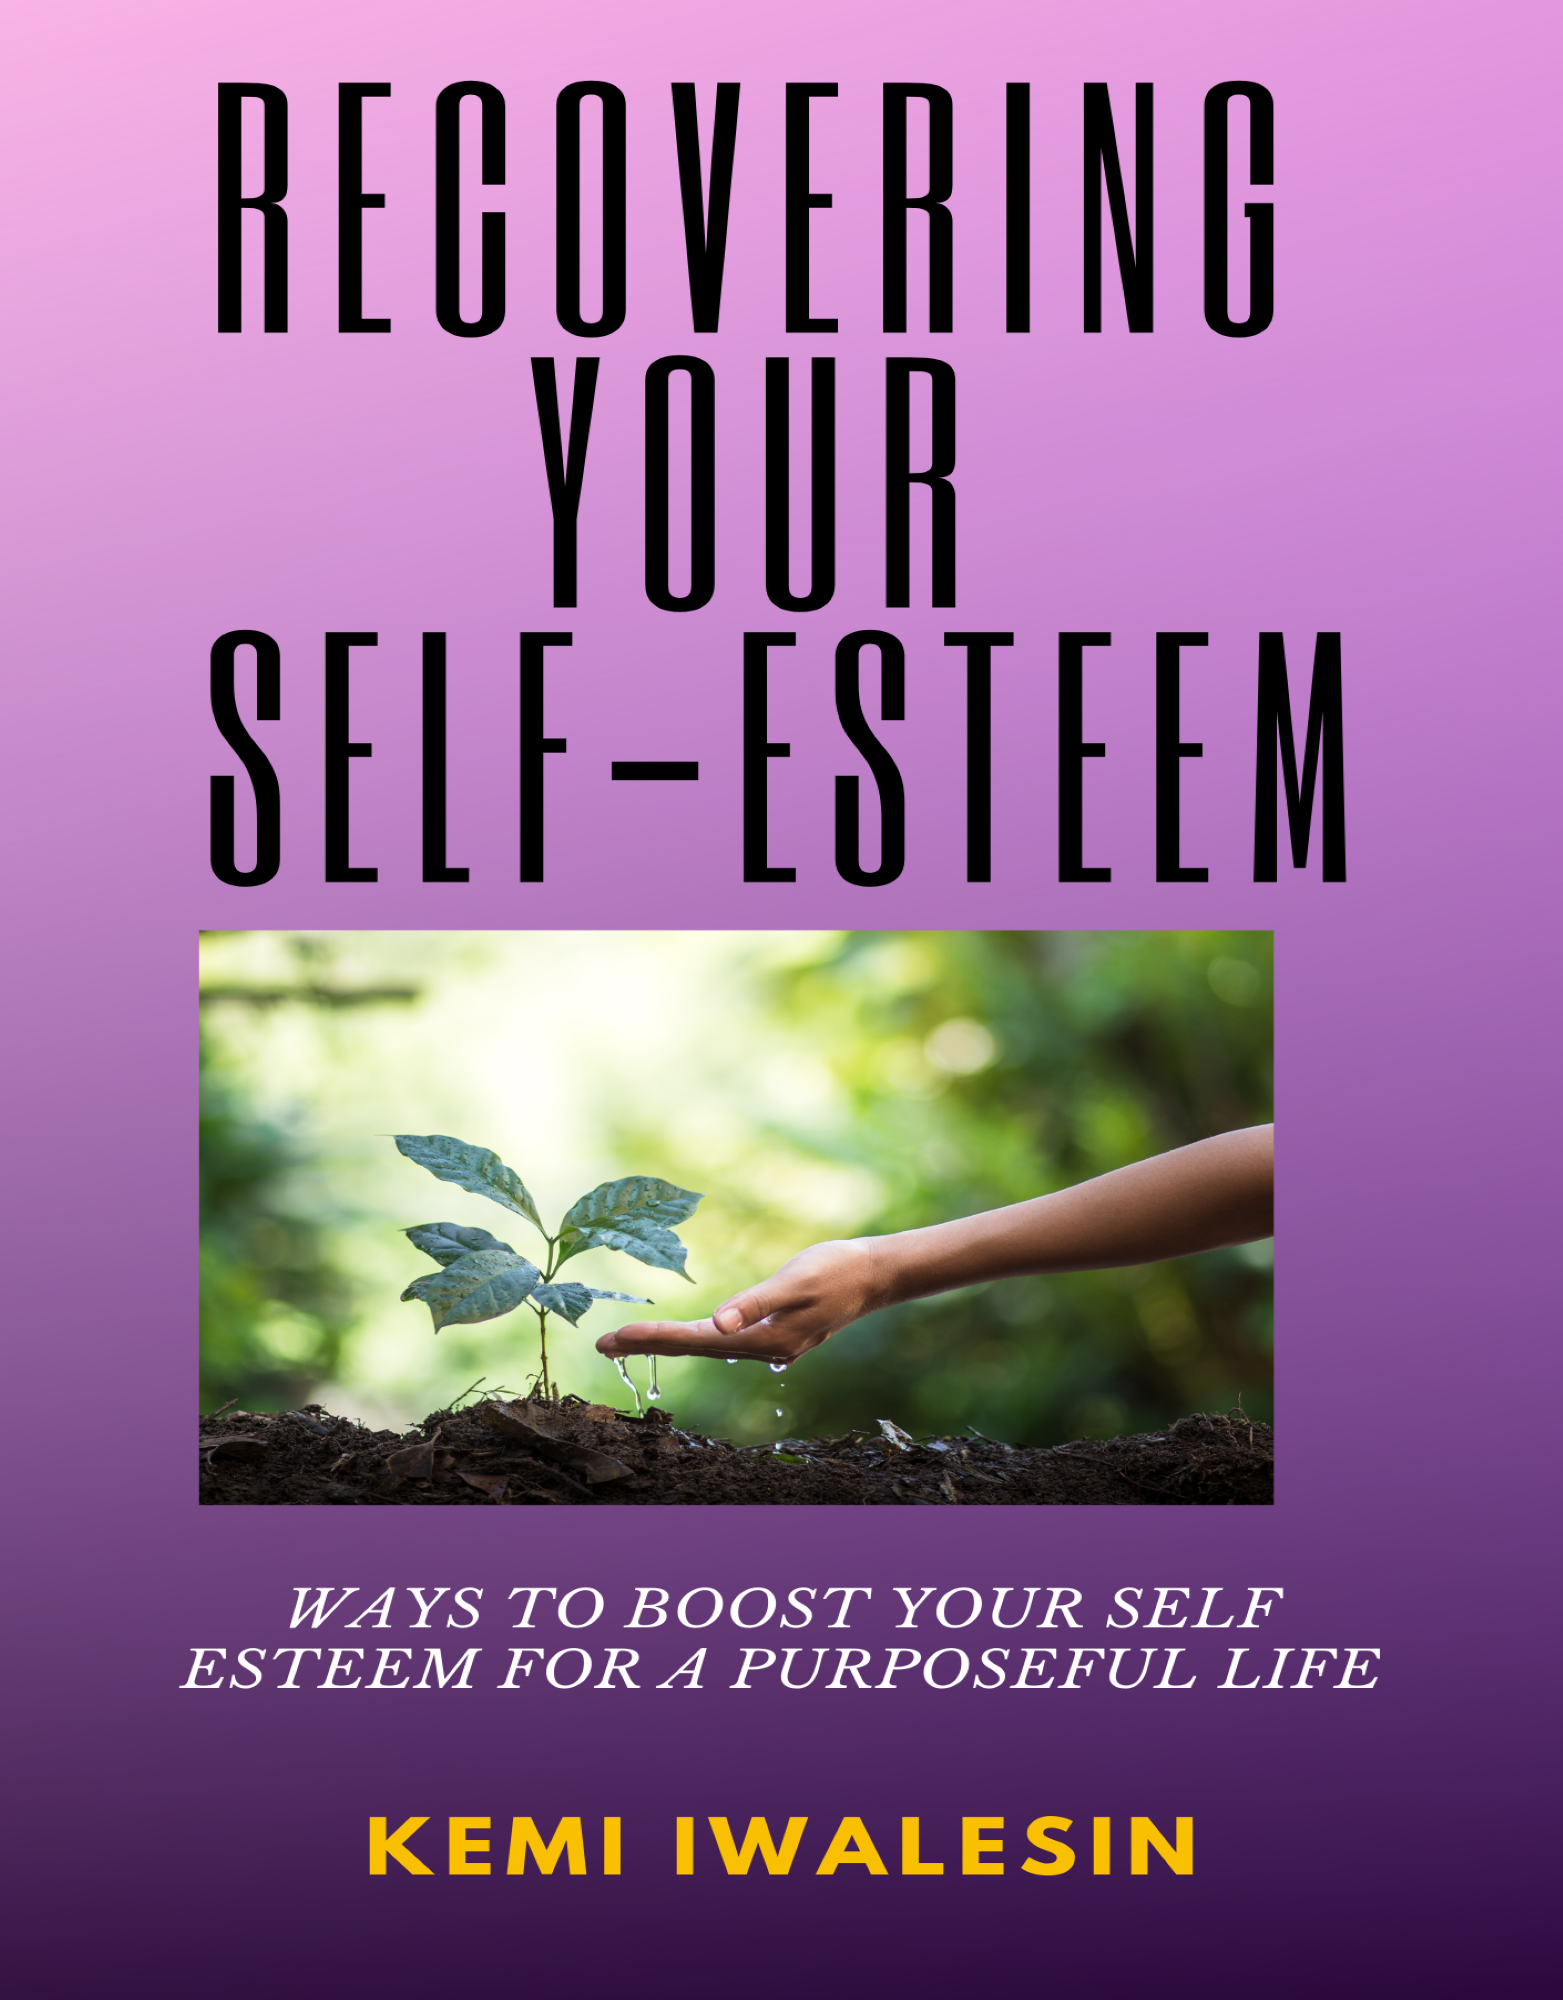 Recovering-Your-Self-Esteem--Ways-to-boost-your-self-esteem-for-a-Purposeful-Life-